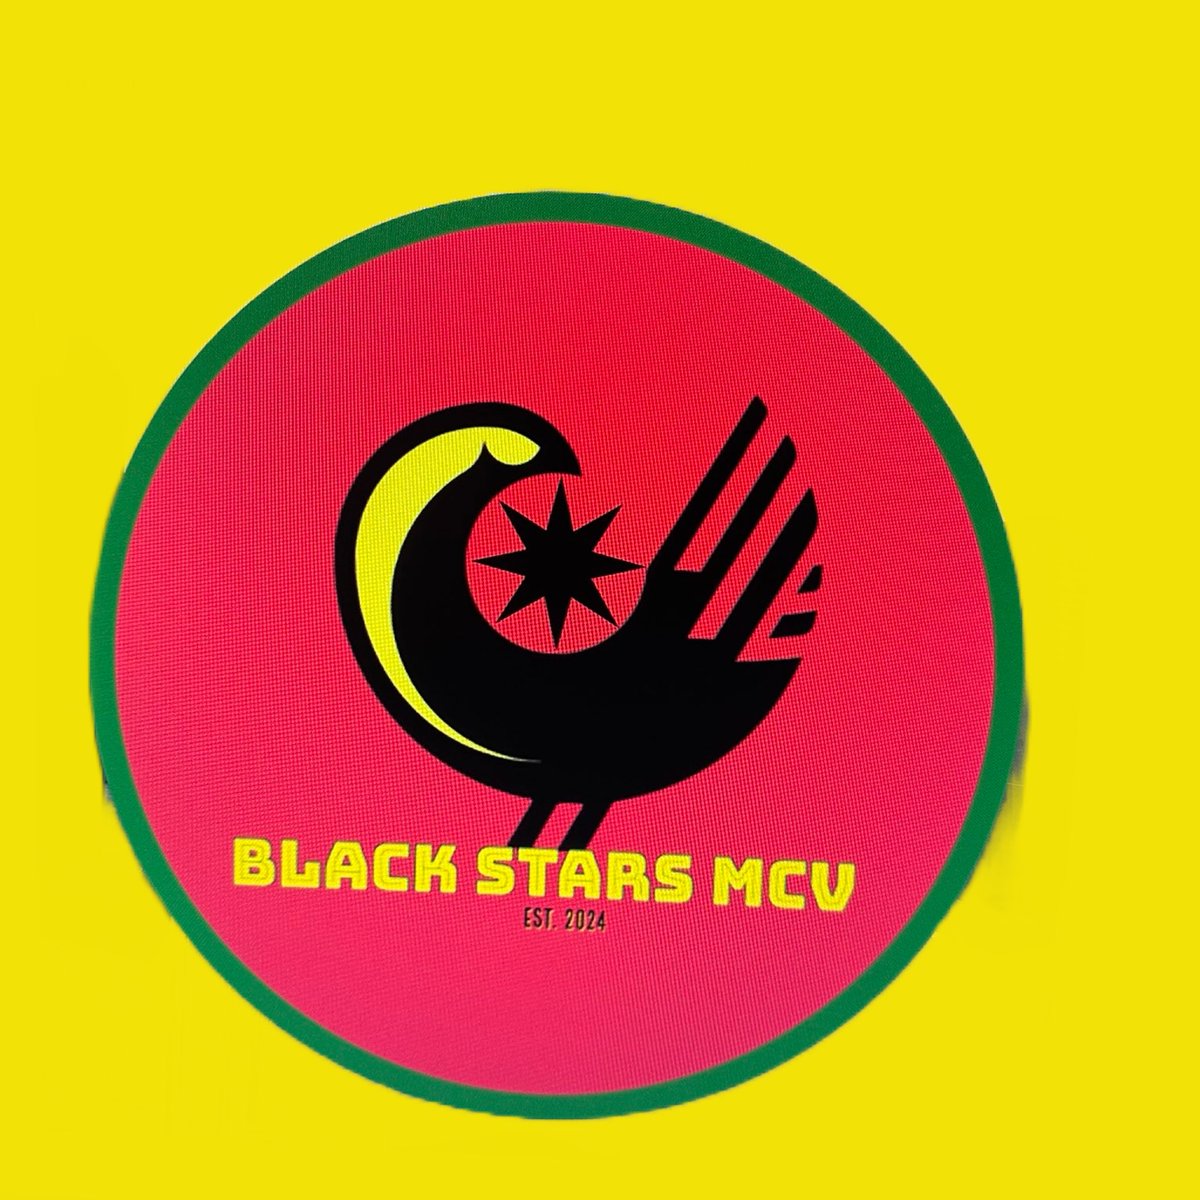 Sankofa Birds for unity, the Black Stars for diversity, and a feather for inclusivity. Let's celebrate unity in the game we love! @M_McDaniel2012 @blackstarsMCV
#BlackStar #FootballForAll #UnityInDiversity 🙌🏾🙌🏼🙌🏿
#SupporterGroup #CityParkFun #SoccerFans #Community #Diversity